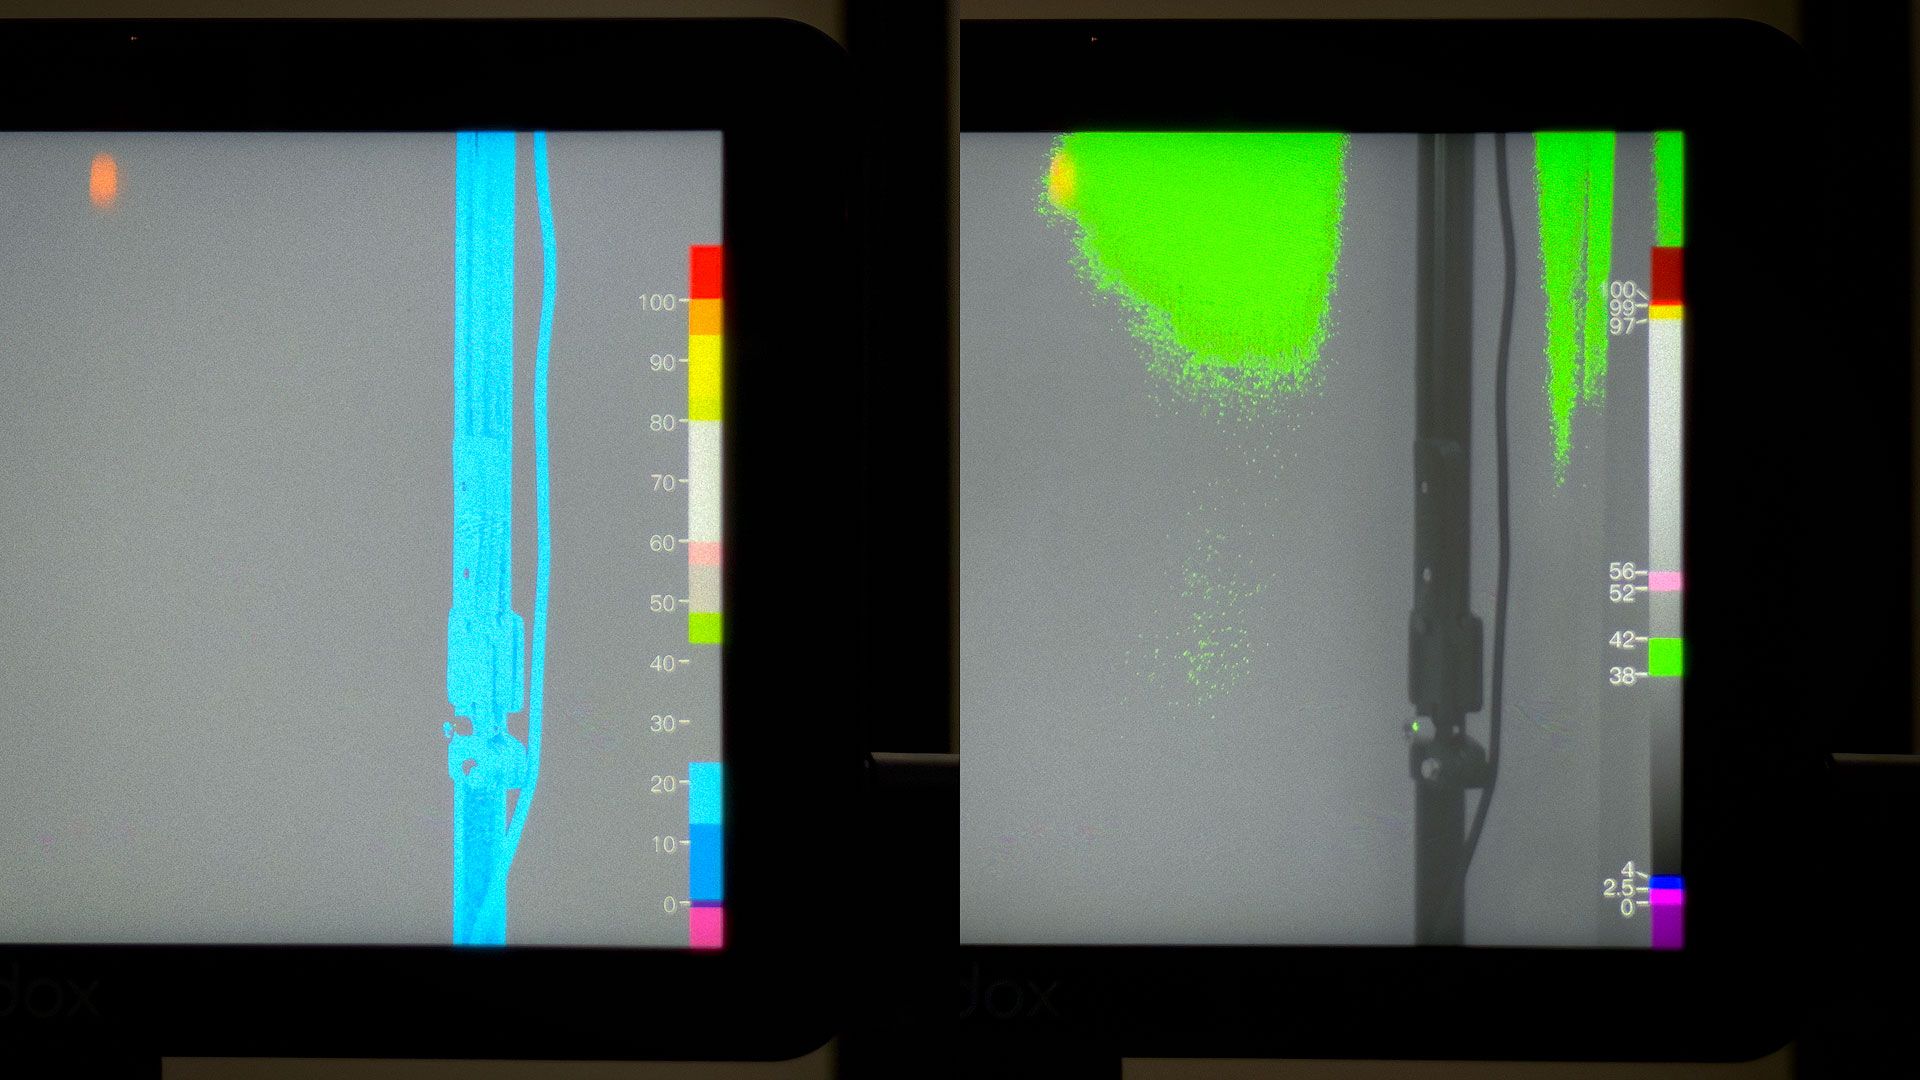 False color mode 1 (left) and mode 2 (right)